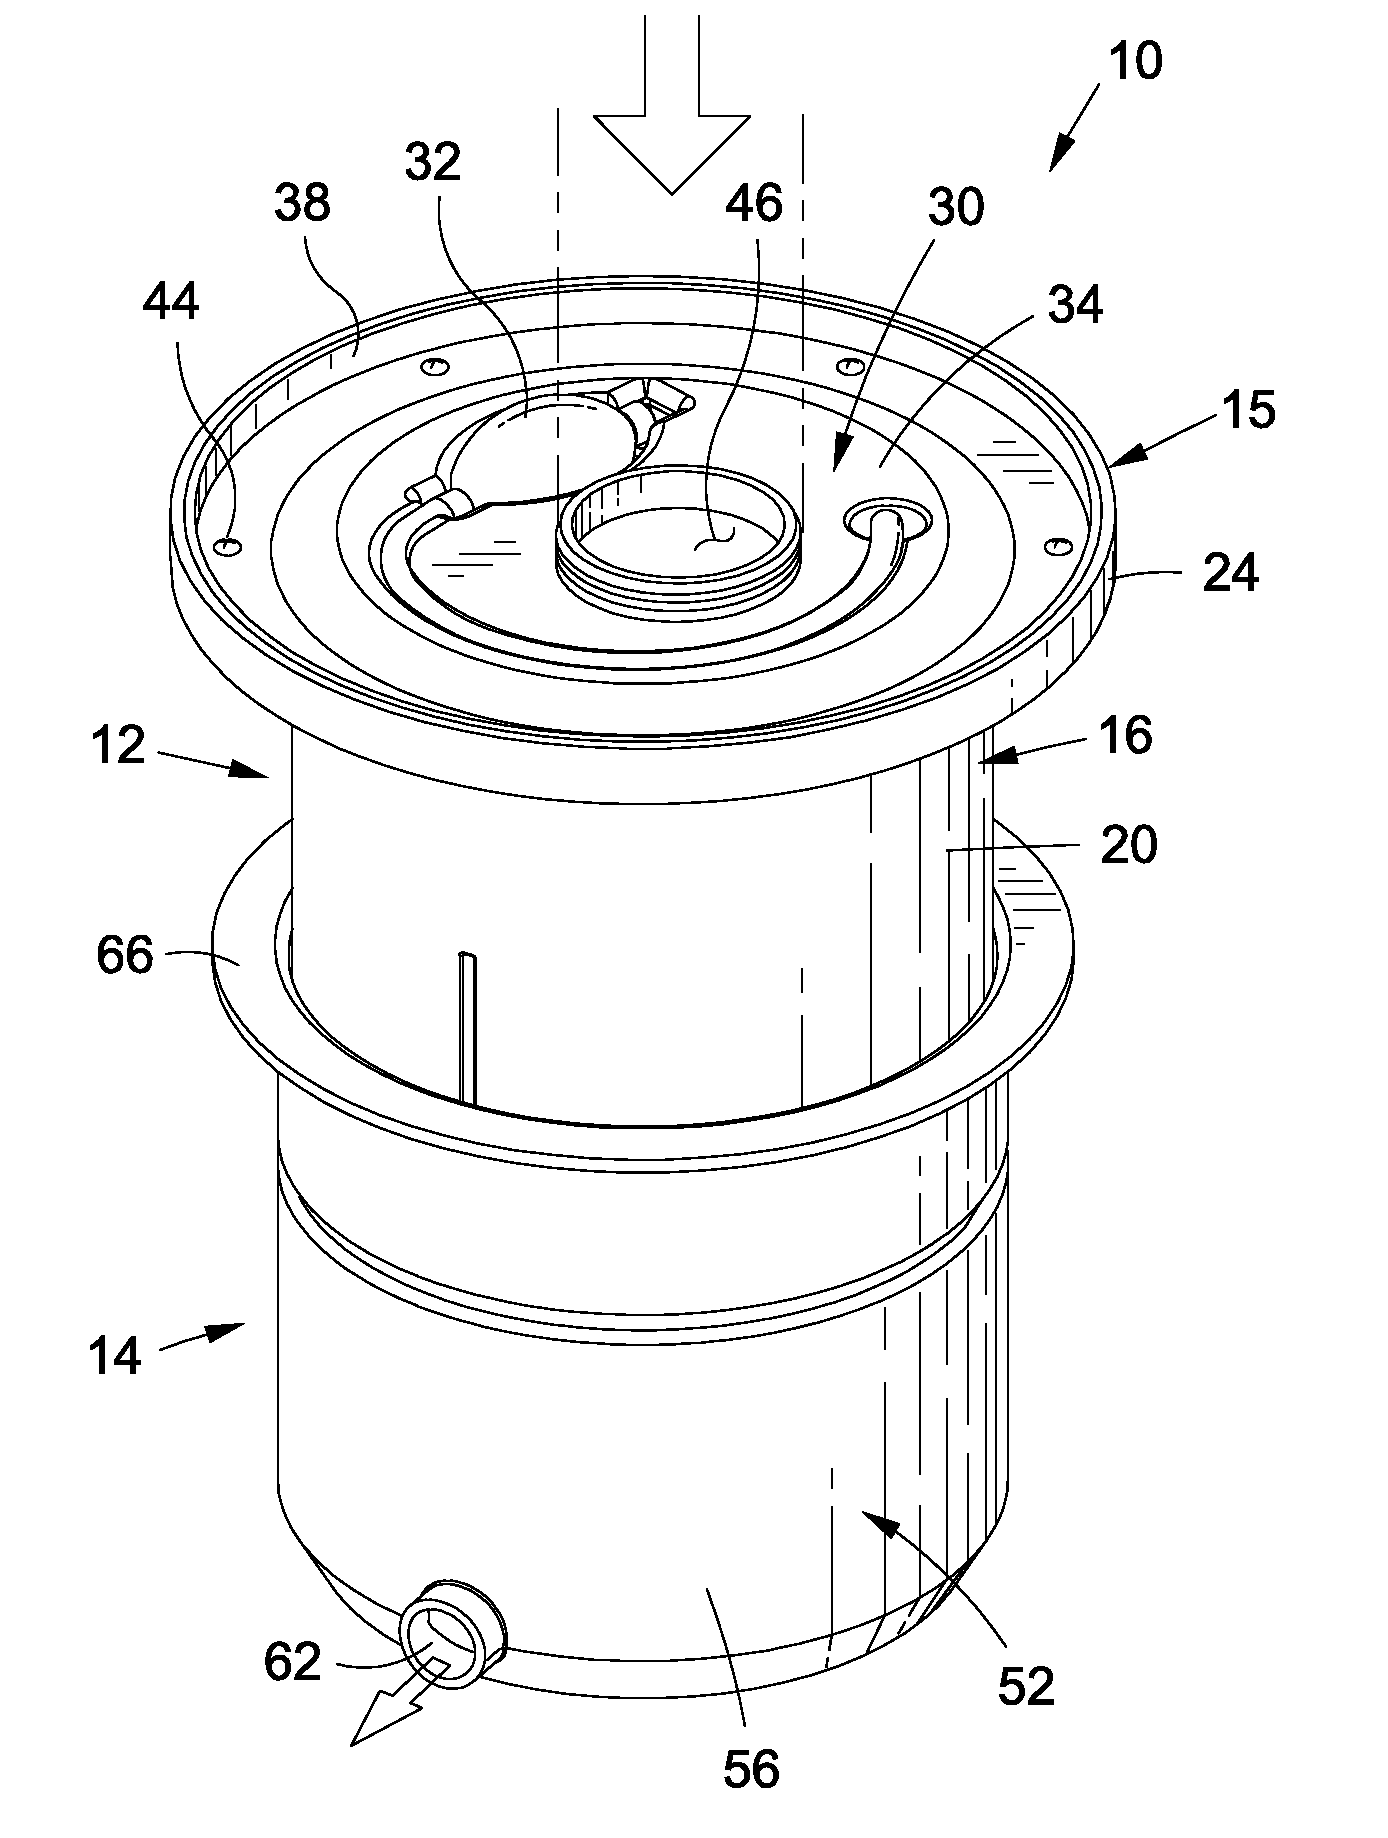 Water filtration system having selectively configurable filtration capabilities